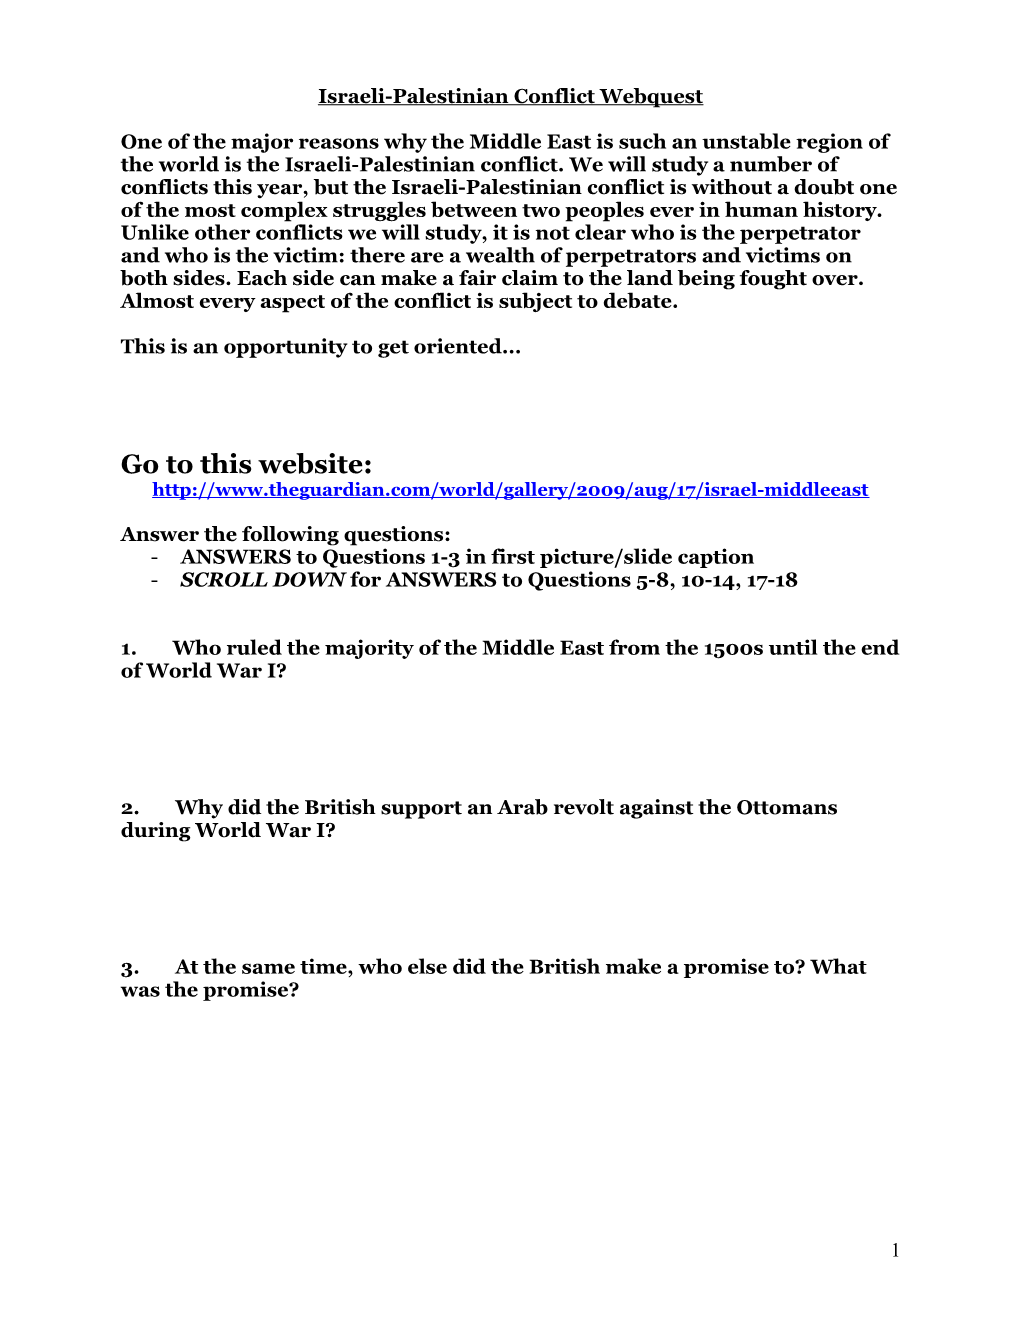 Conflict in the Middle East Web-Quest